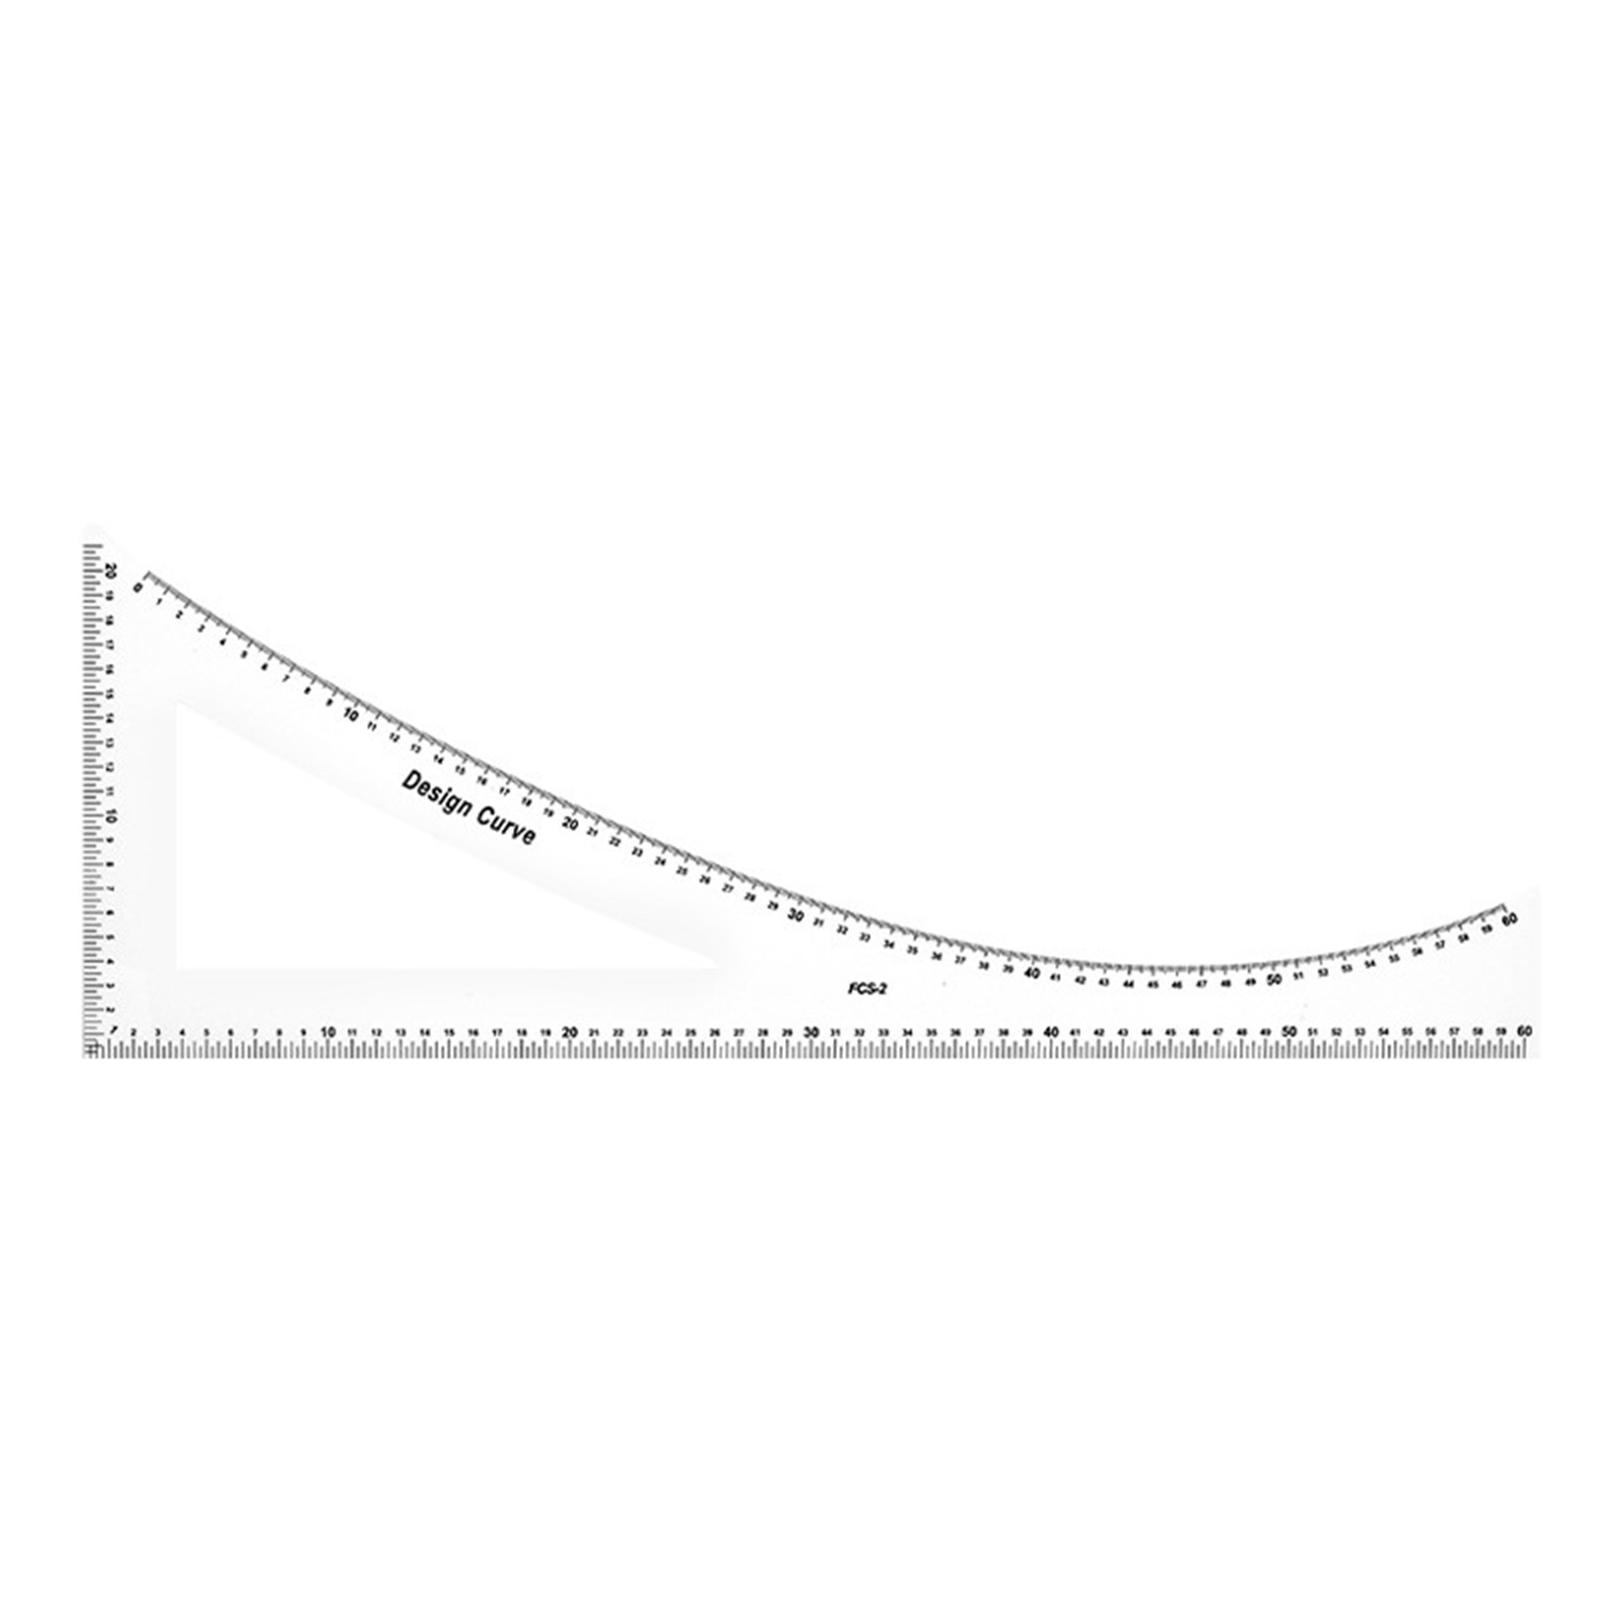 French Curve Ruler Tailor Tool Clothing Pattern Dress Curve Ruler